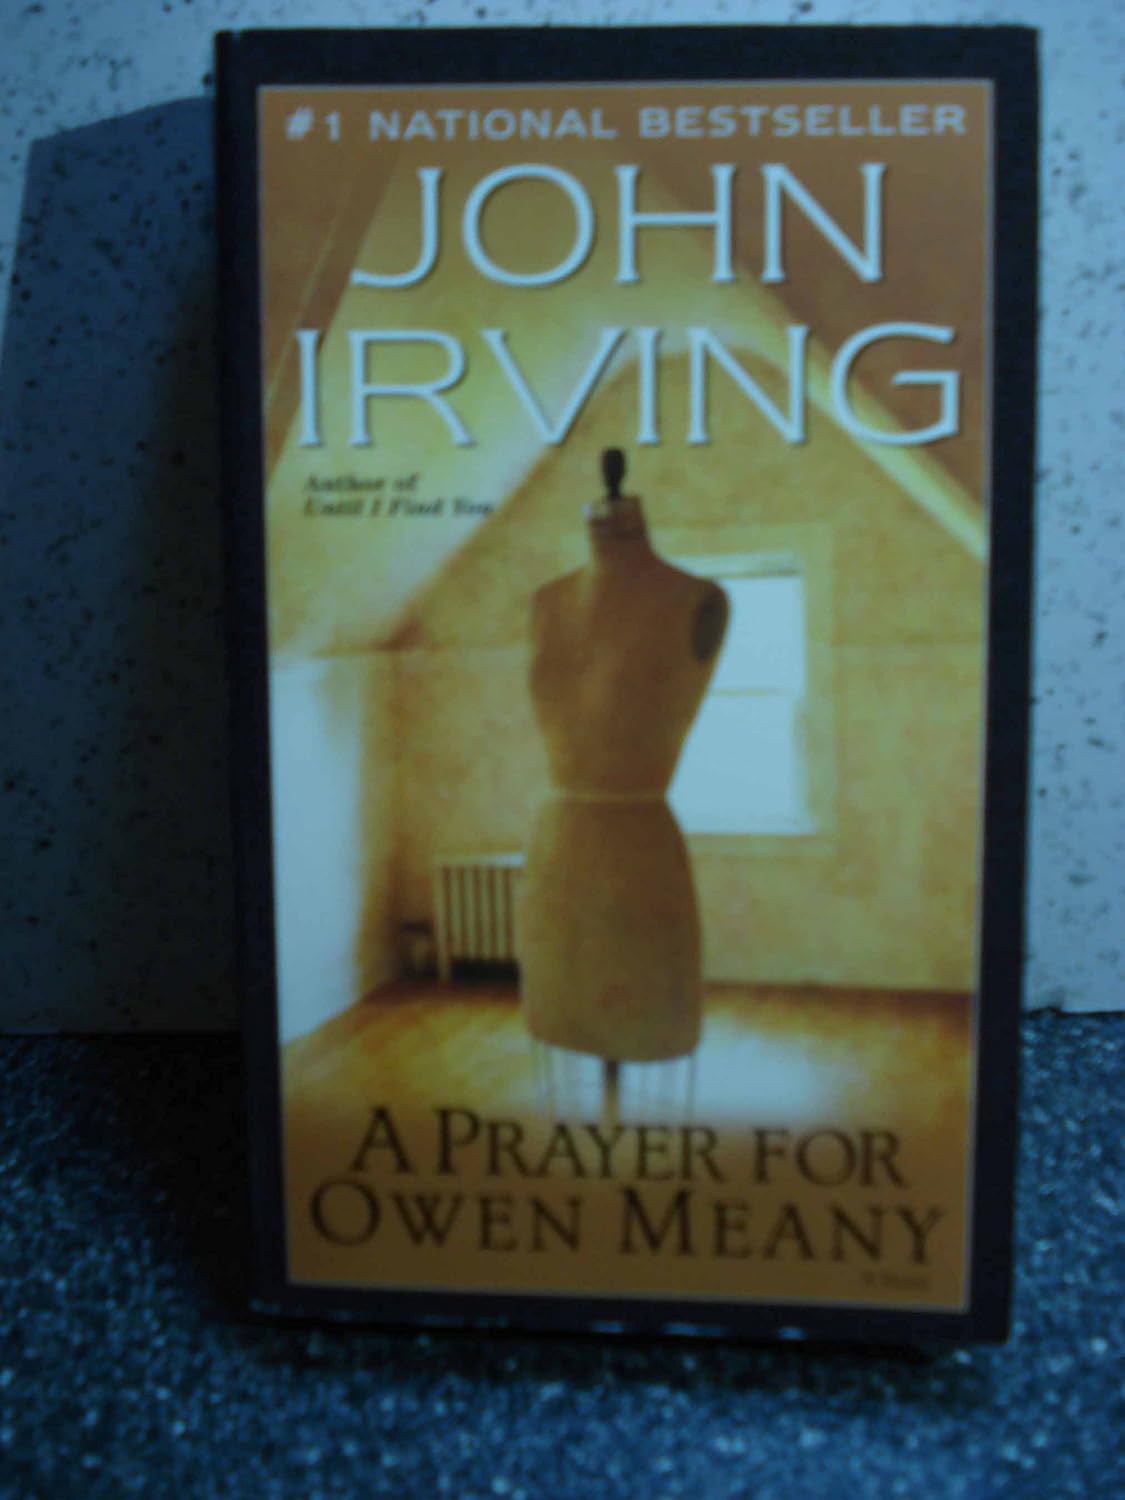 Summary: A Prayer for Owen Meany